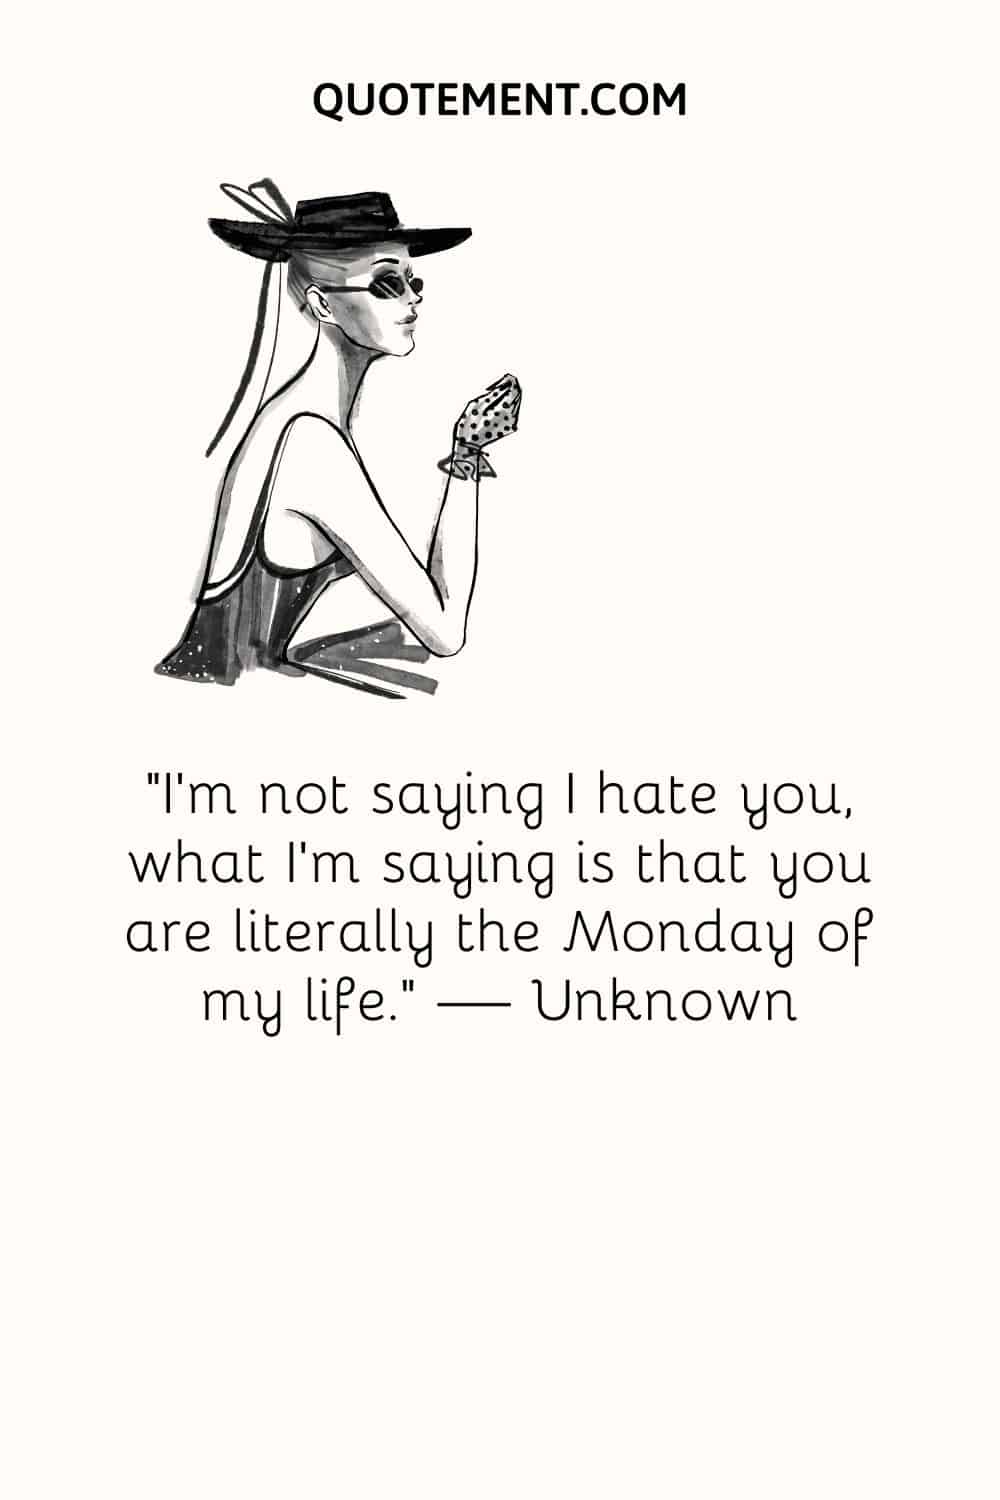 “I’m not saying I hate you, what I’m saying is that you are literally the Monday of my life.” — Unknown